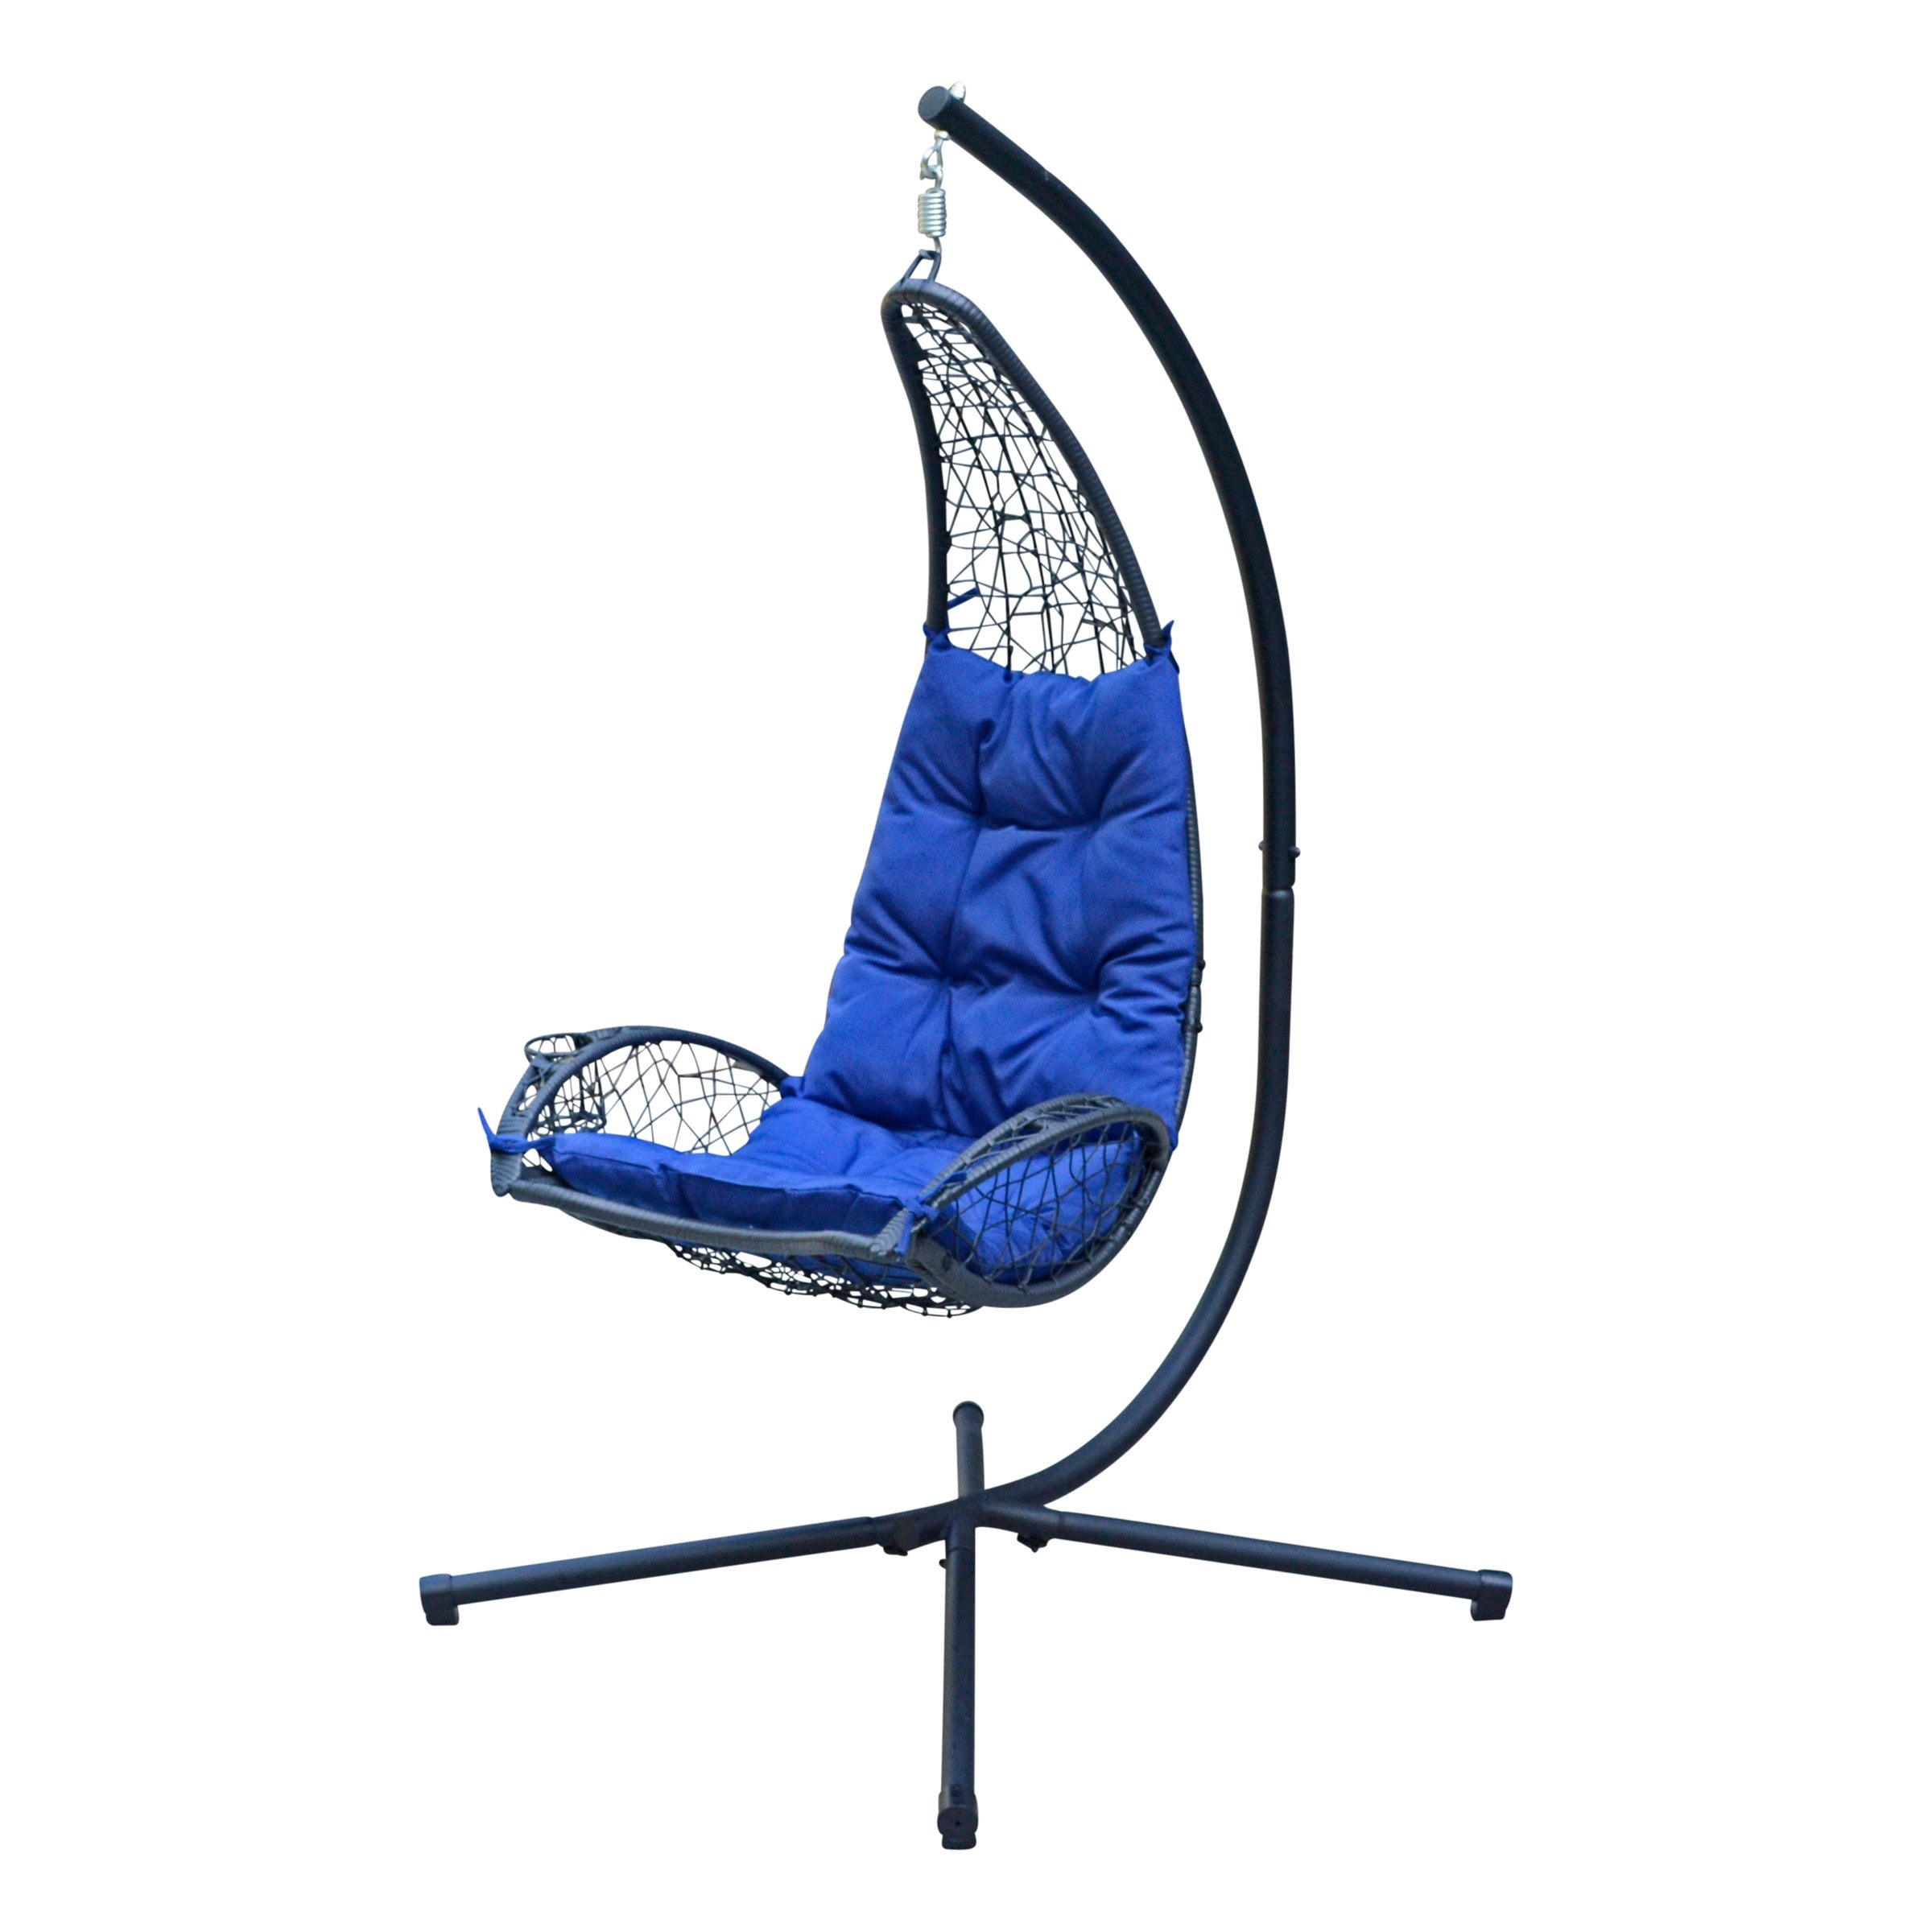 Cushioned Rattan Wicker Hanging Chair Blue